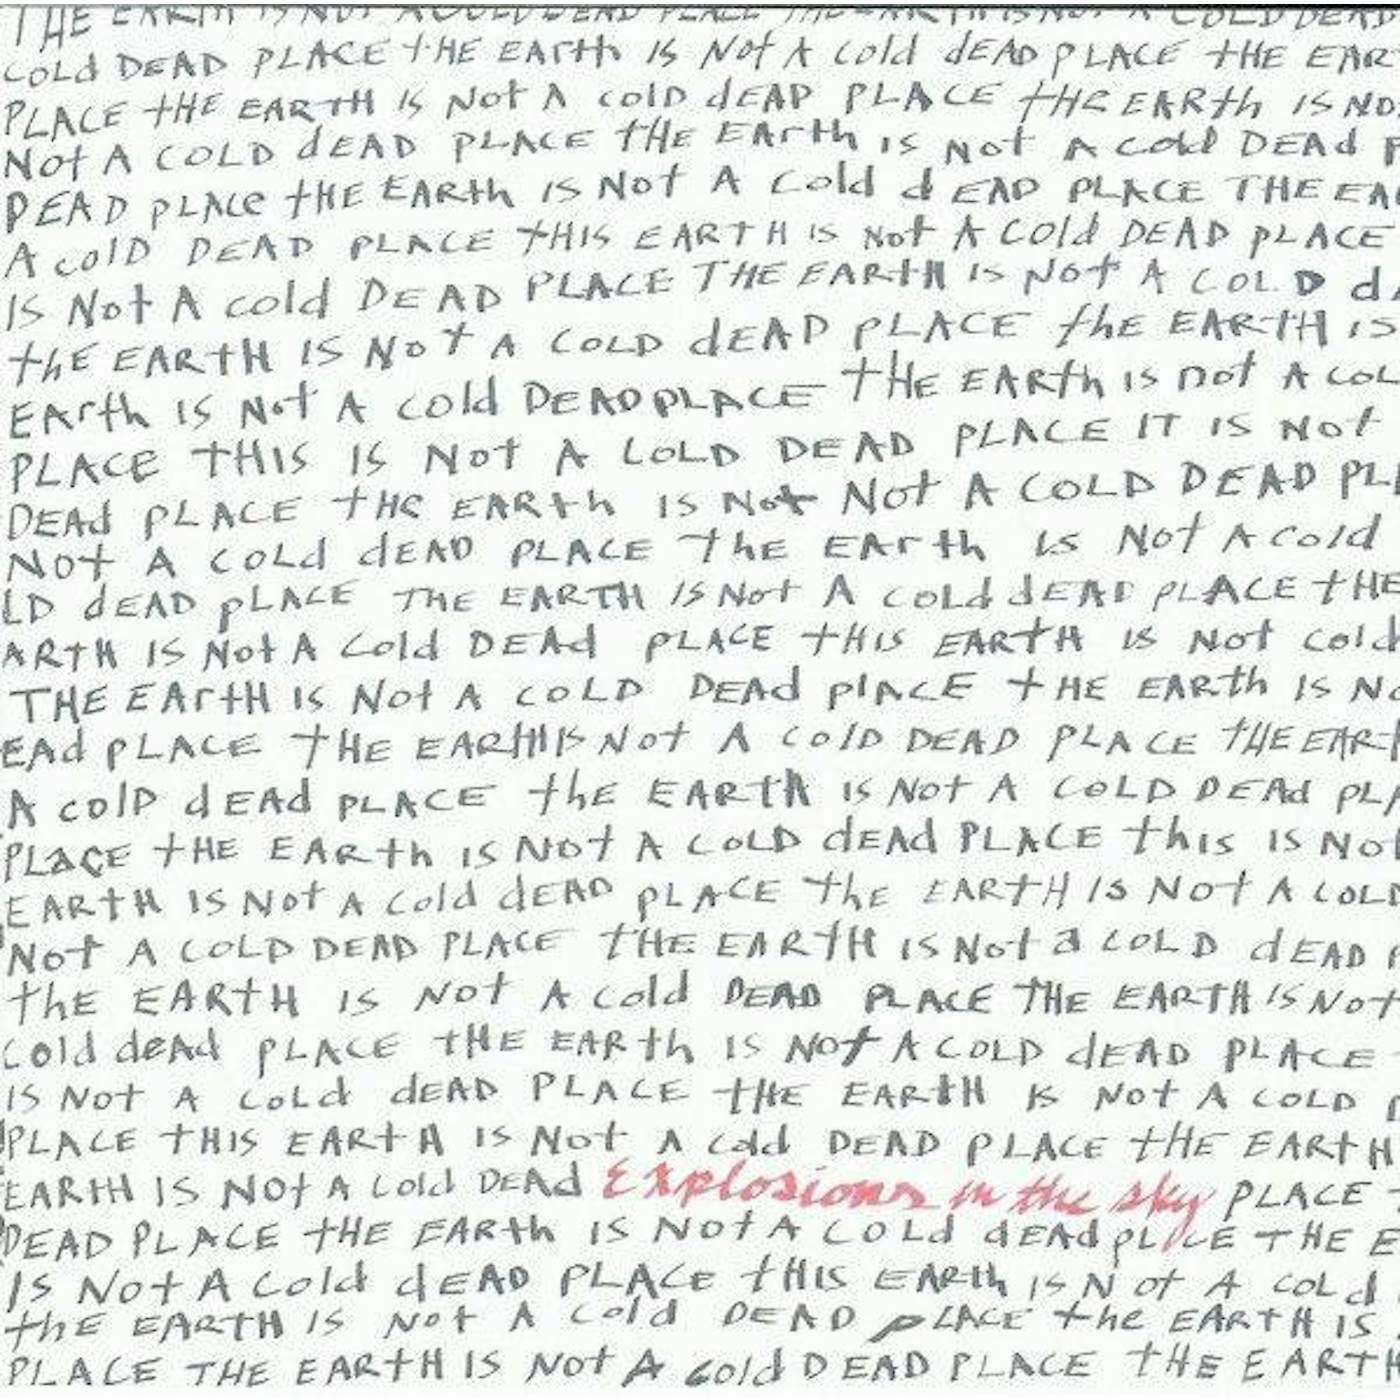 Explosions In The Sky 'The Earth Is Not A Cold Dead Place' Vinyl Record